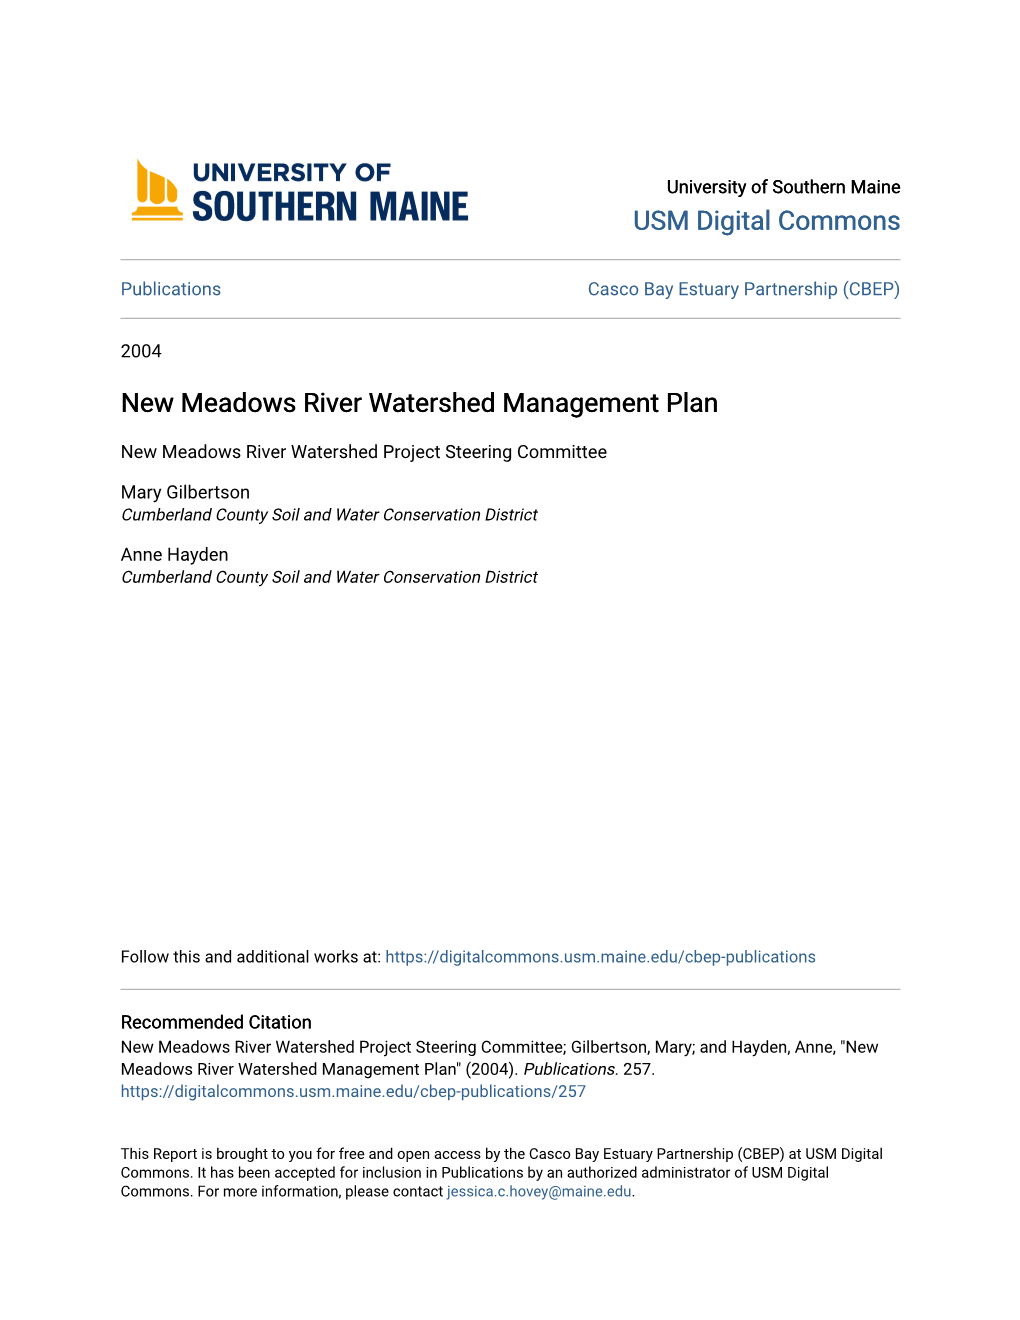 New Meadows River Watershed Management Plan